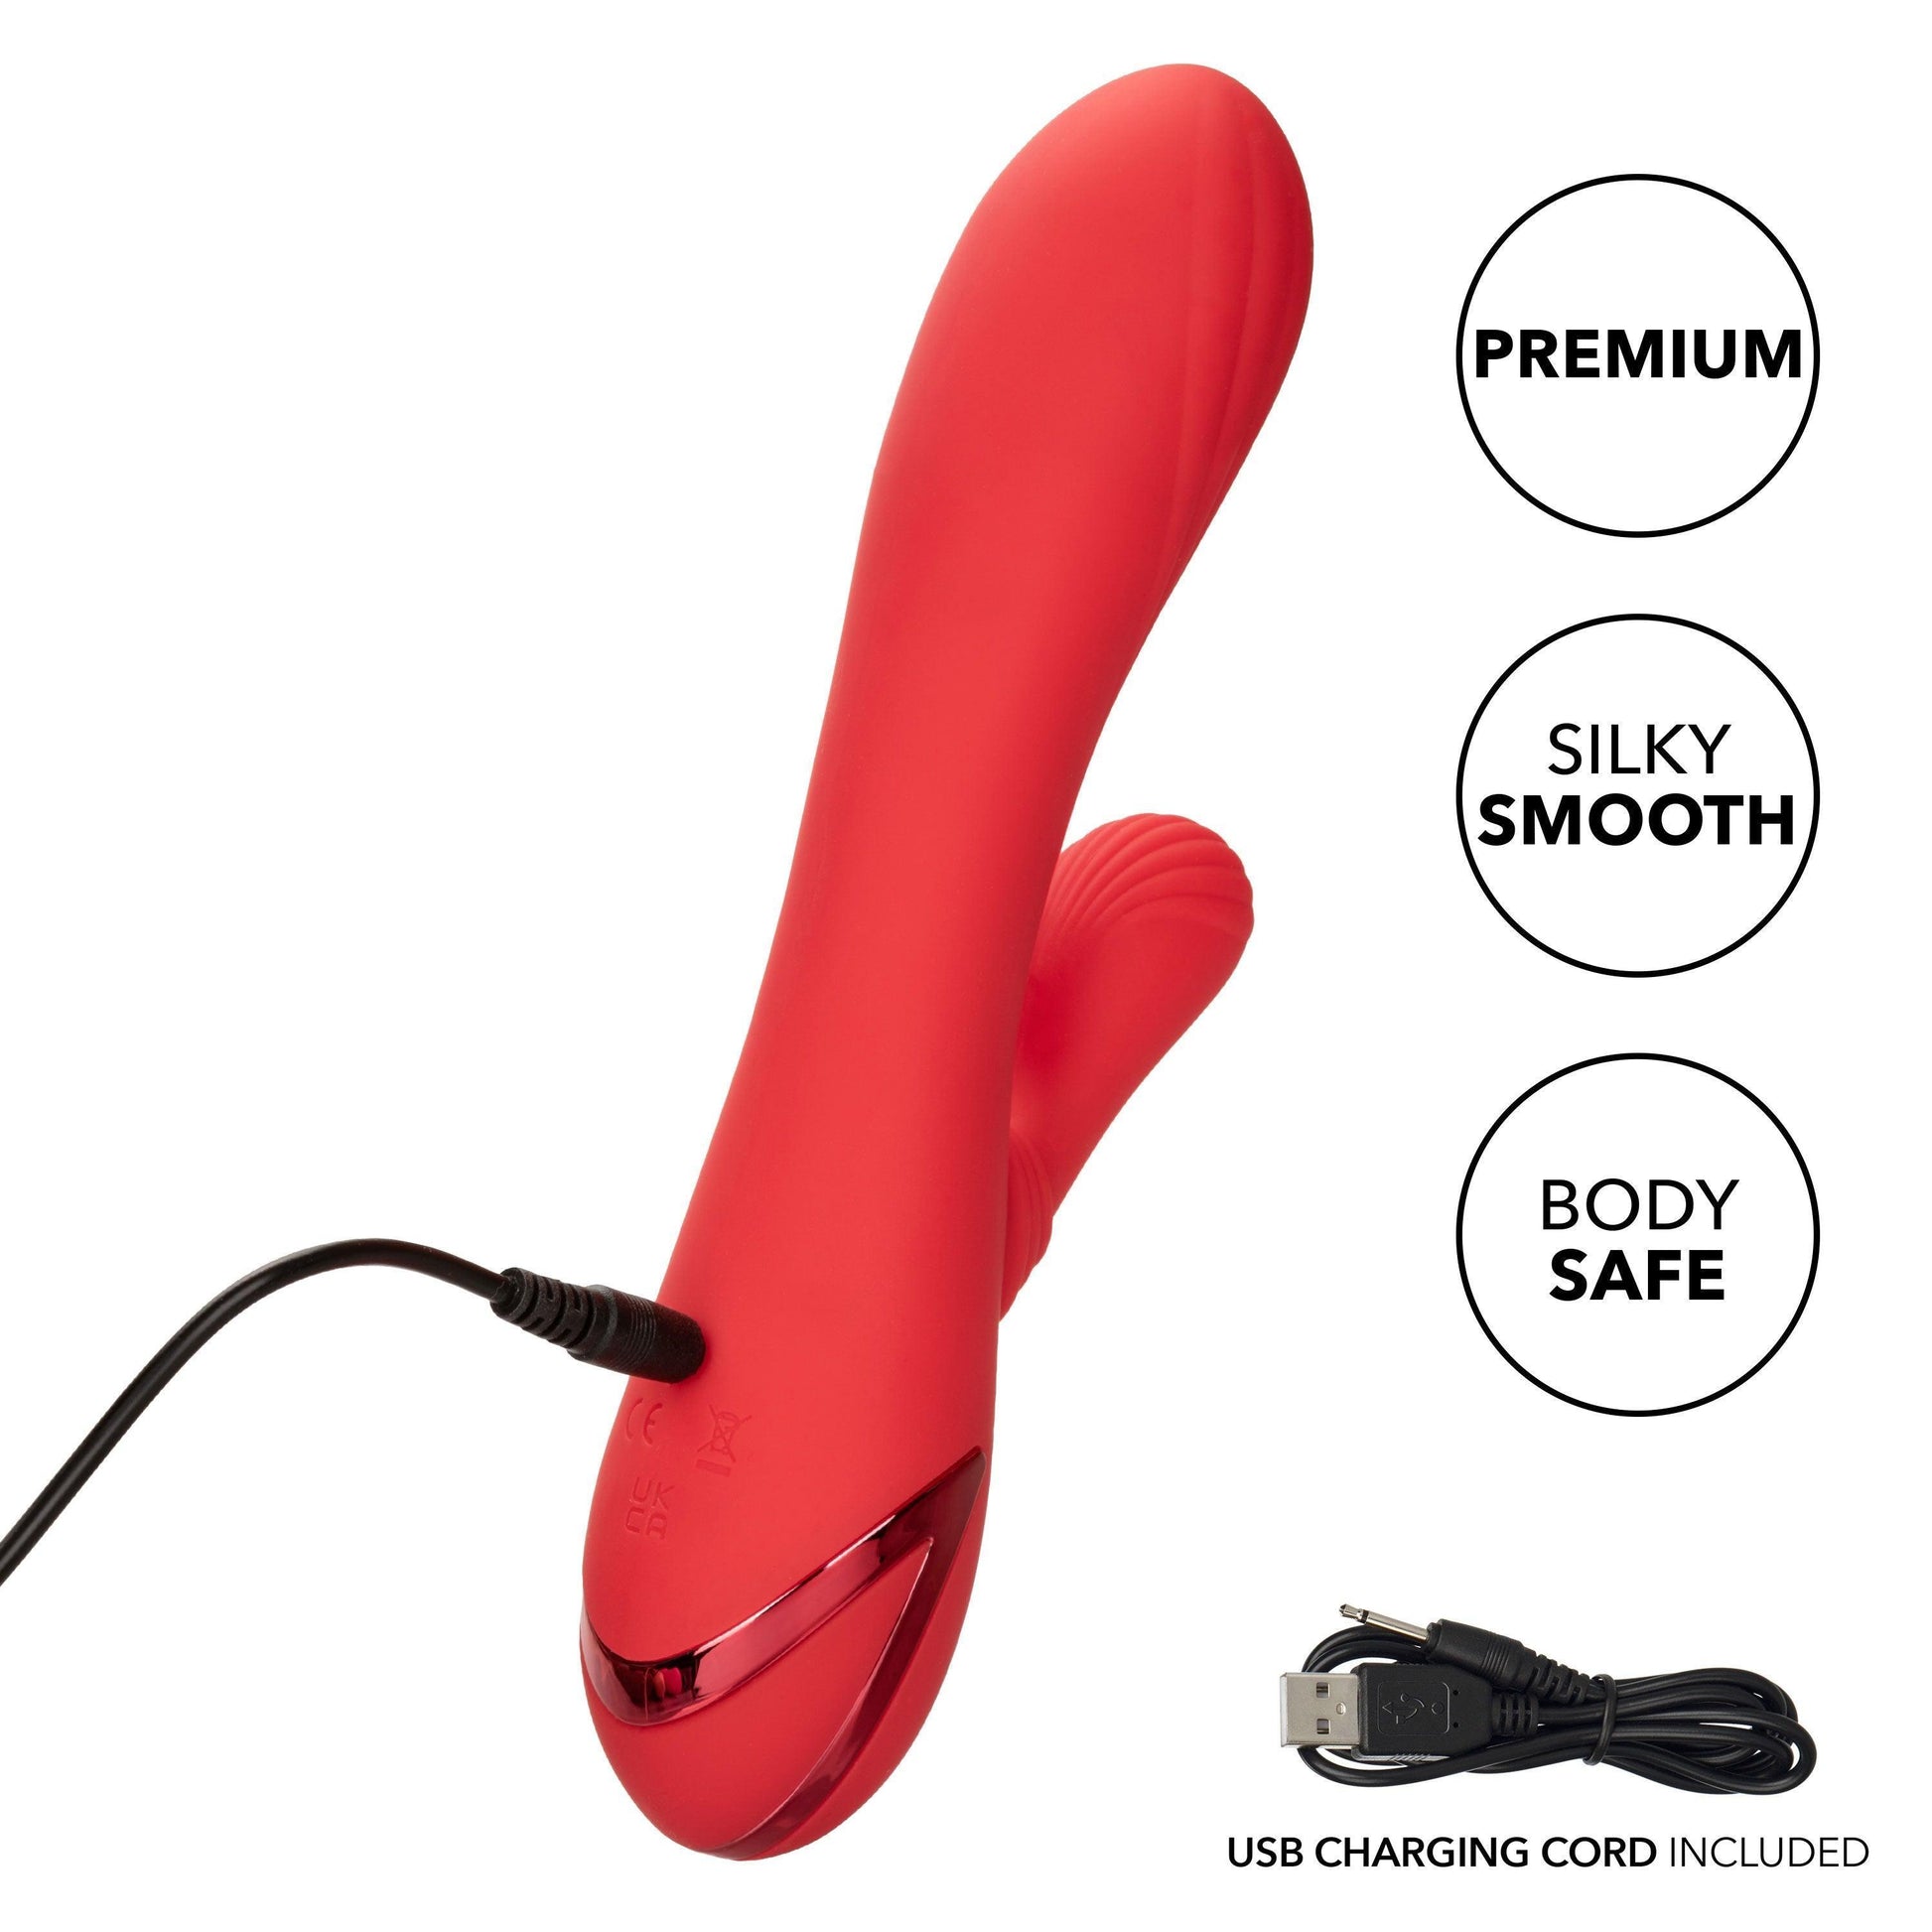 California Dreaming Palisades Passion - Coral - My Sex Toy Hub